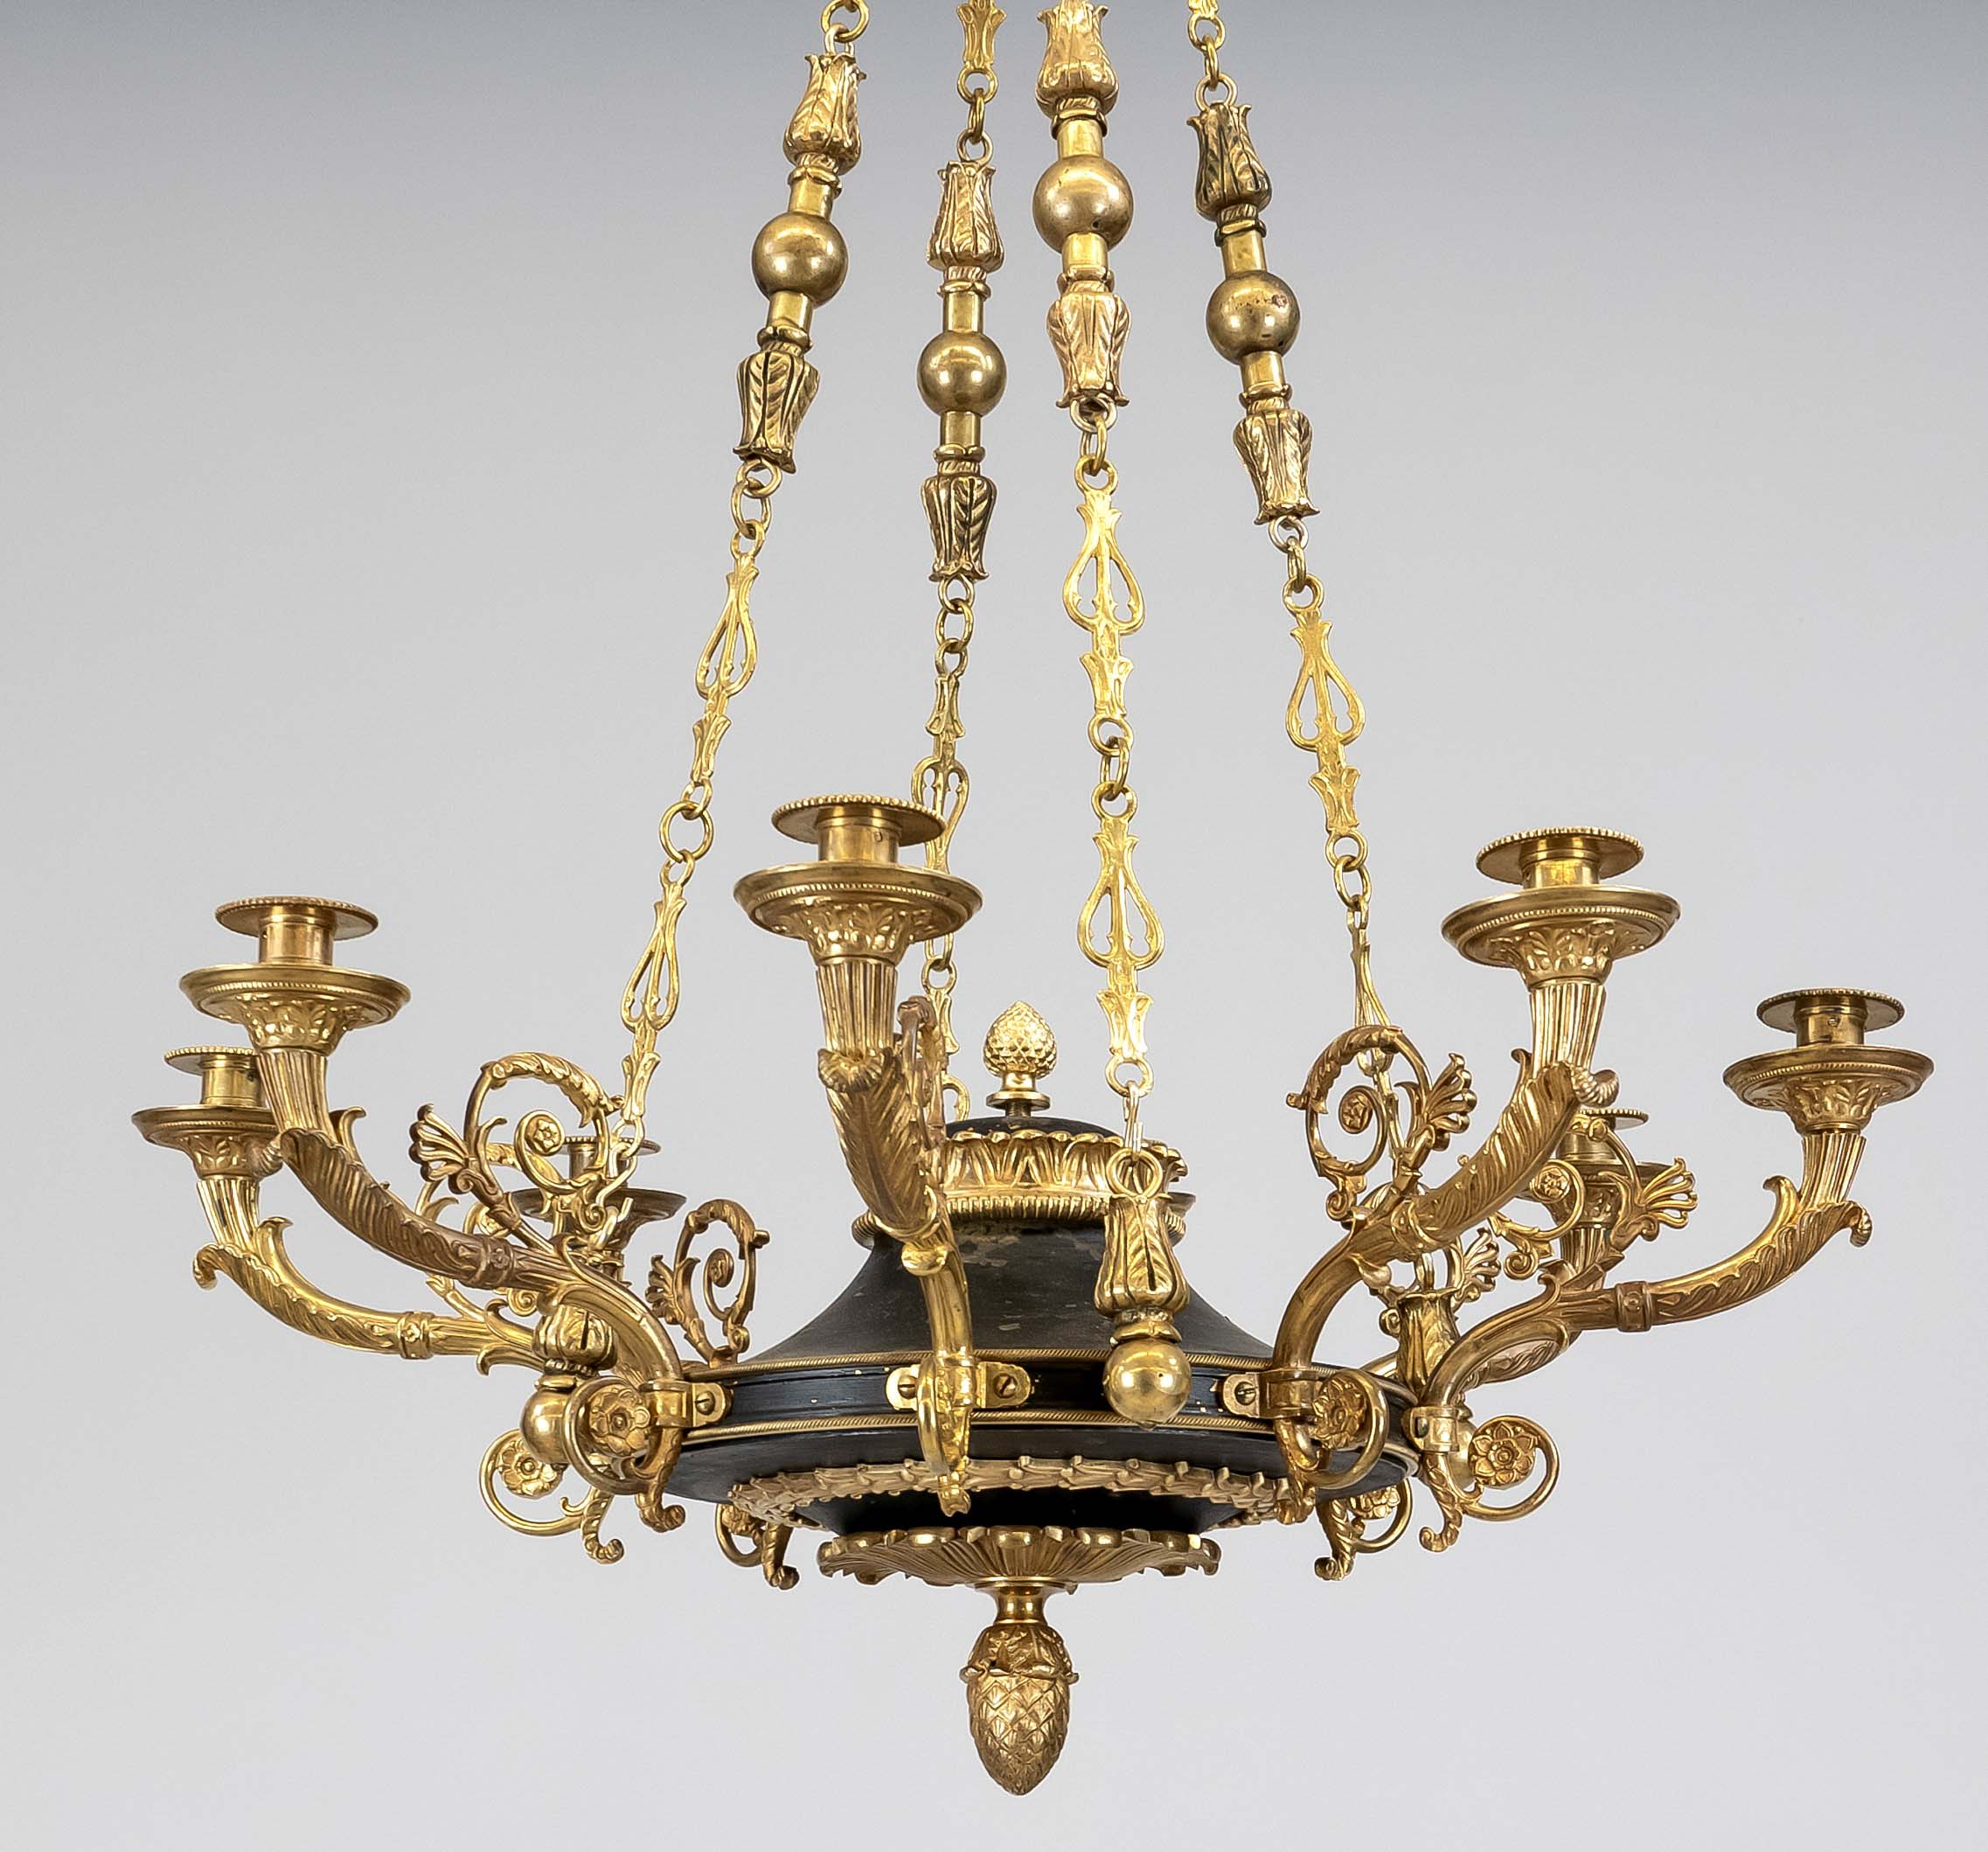 Empire style ceiling chandelier, late 19th century, bronze gilded and iron. Profiled and - Image 2 of 2